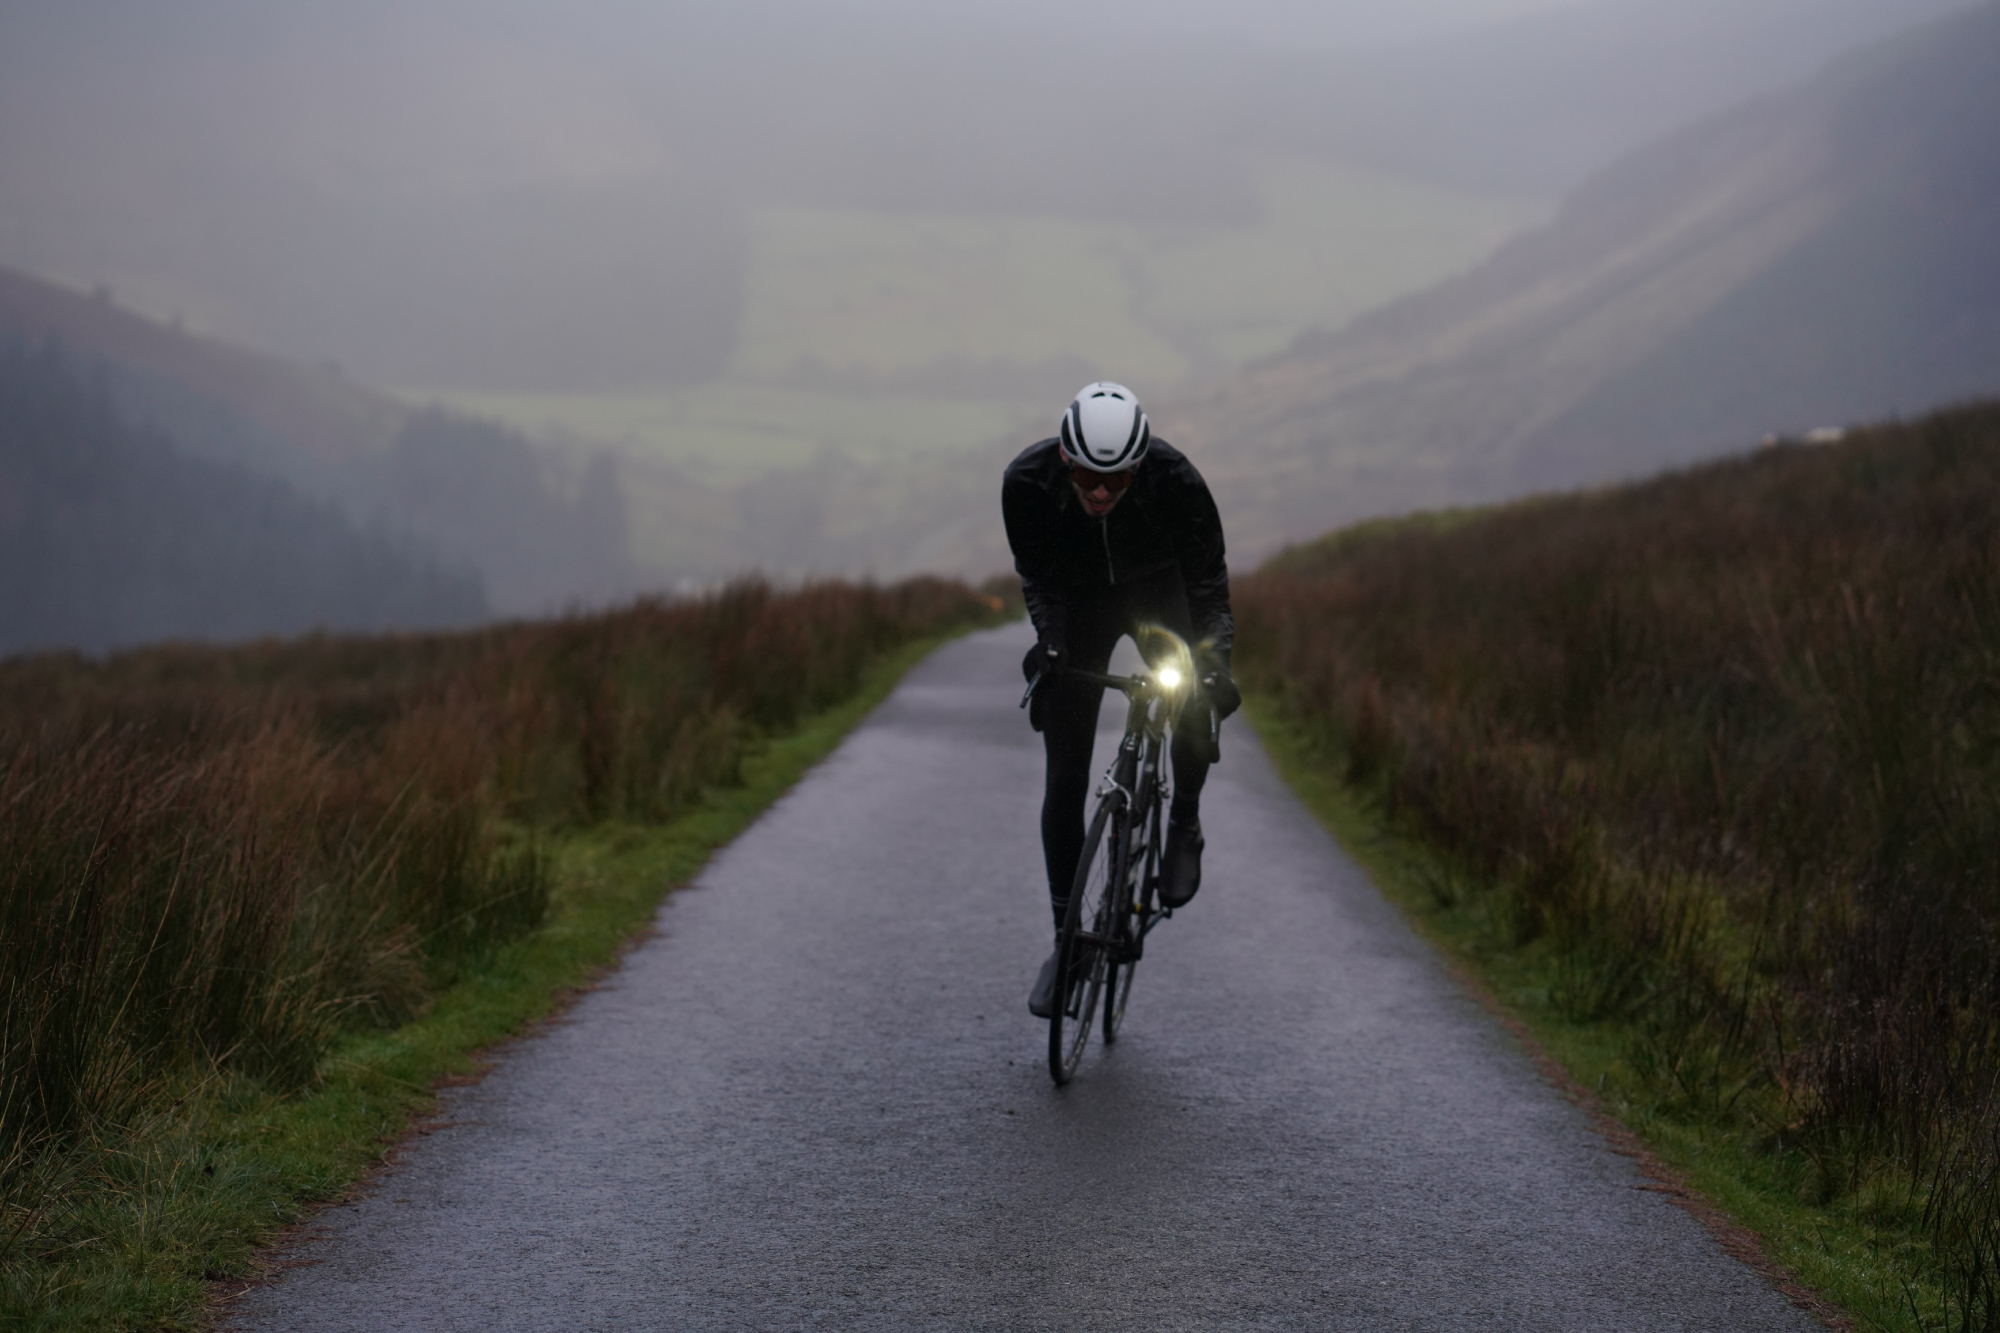 Image shows a person cycling with bike lights in winter